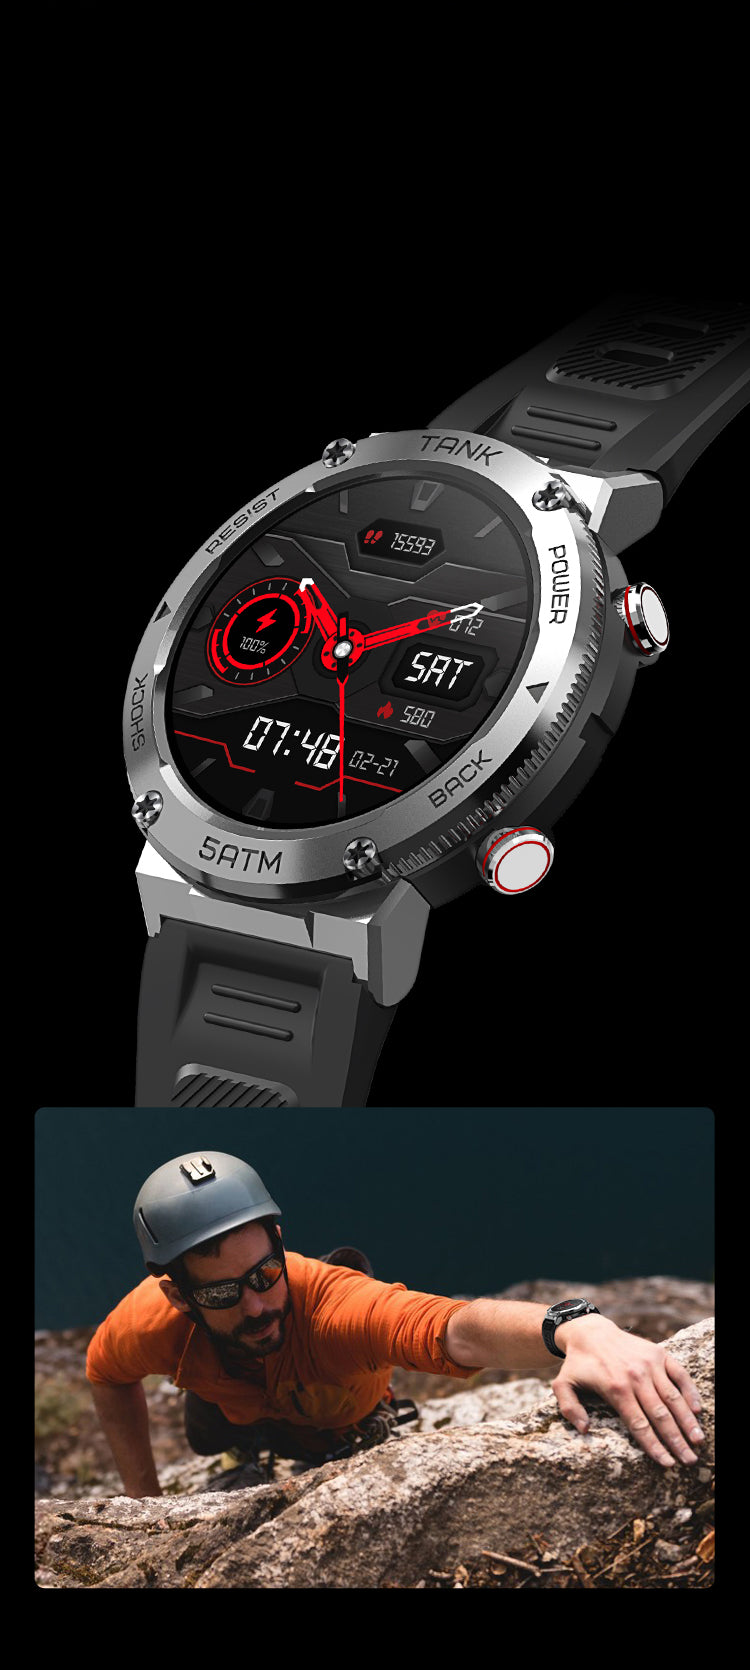 KOSPET TANK T1 Smart Watch sturdy and stylish guardian for the watch